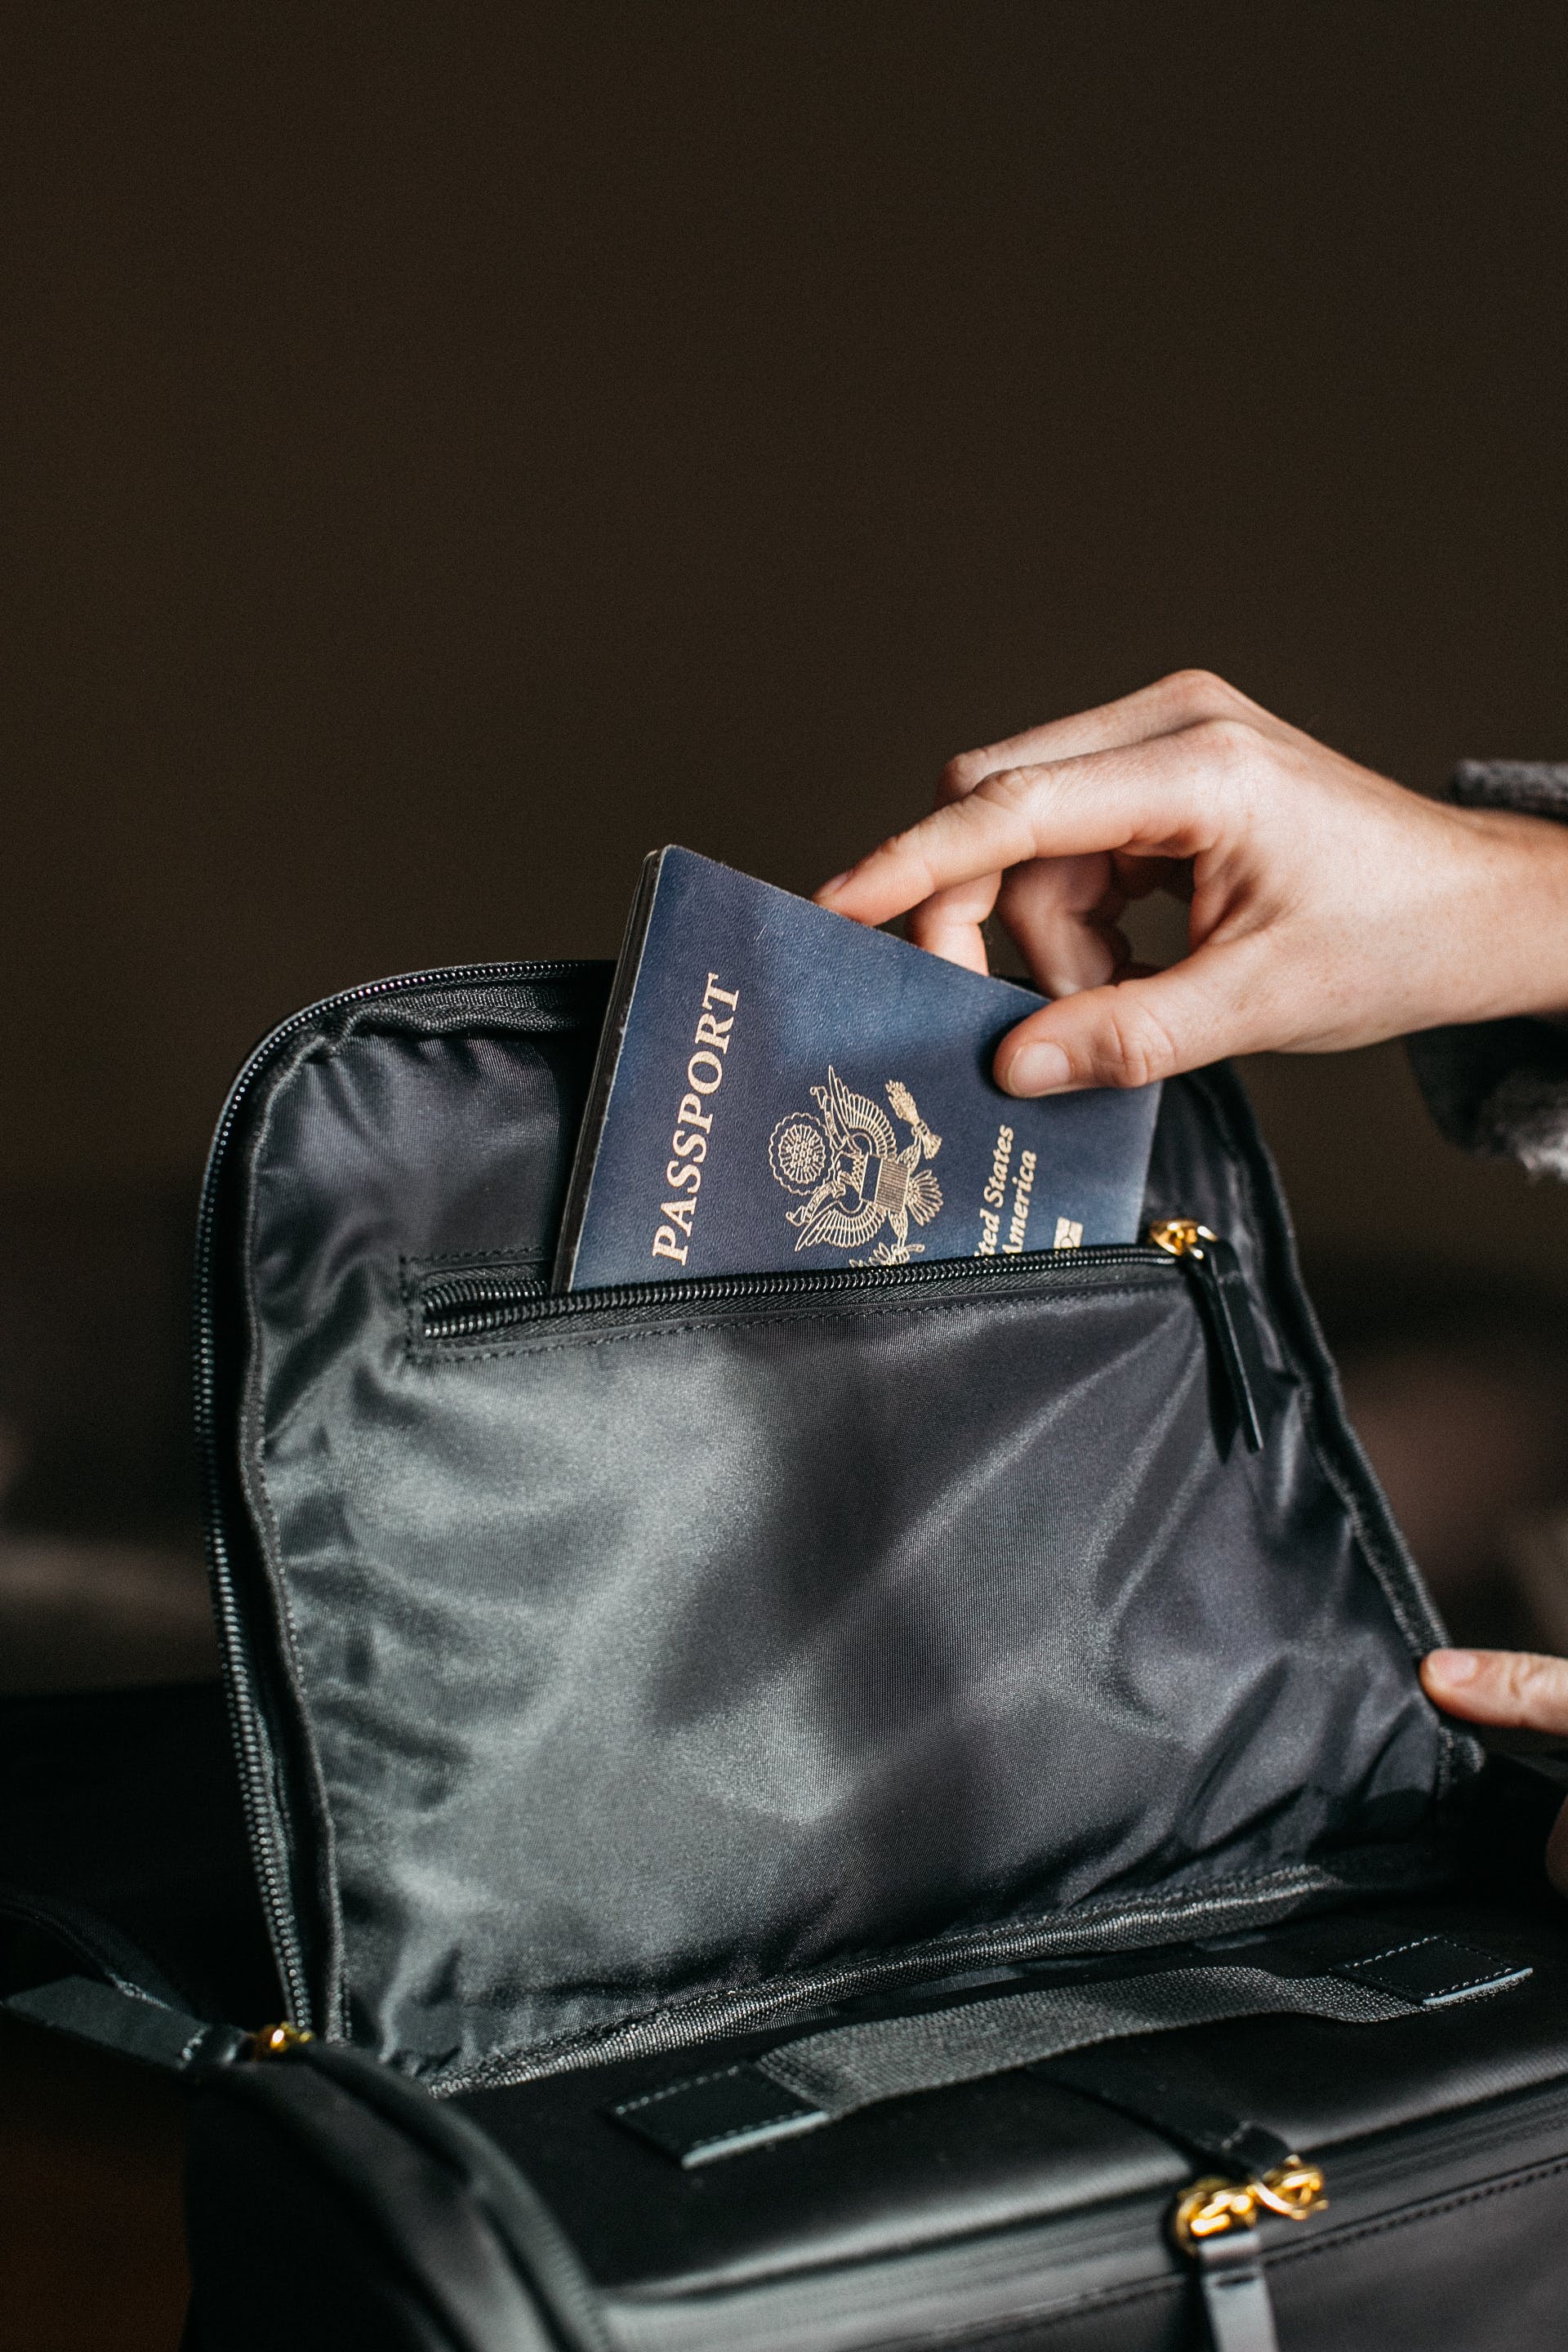 A person putting a passport in a bag | Source: Pexels